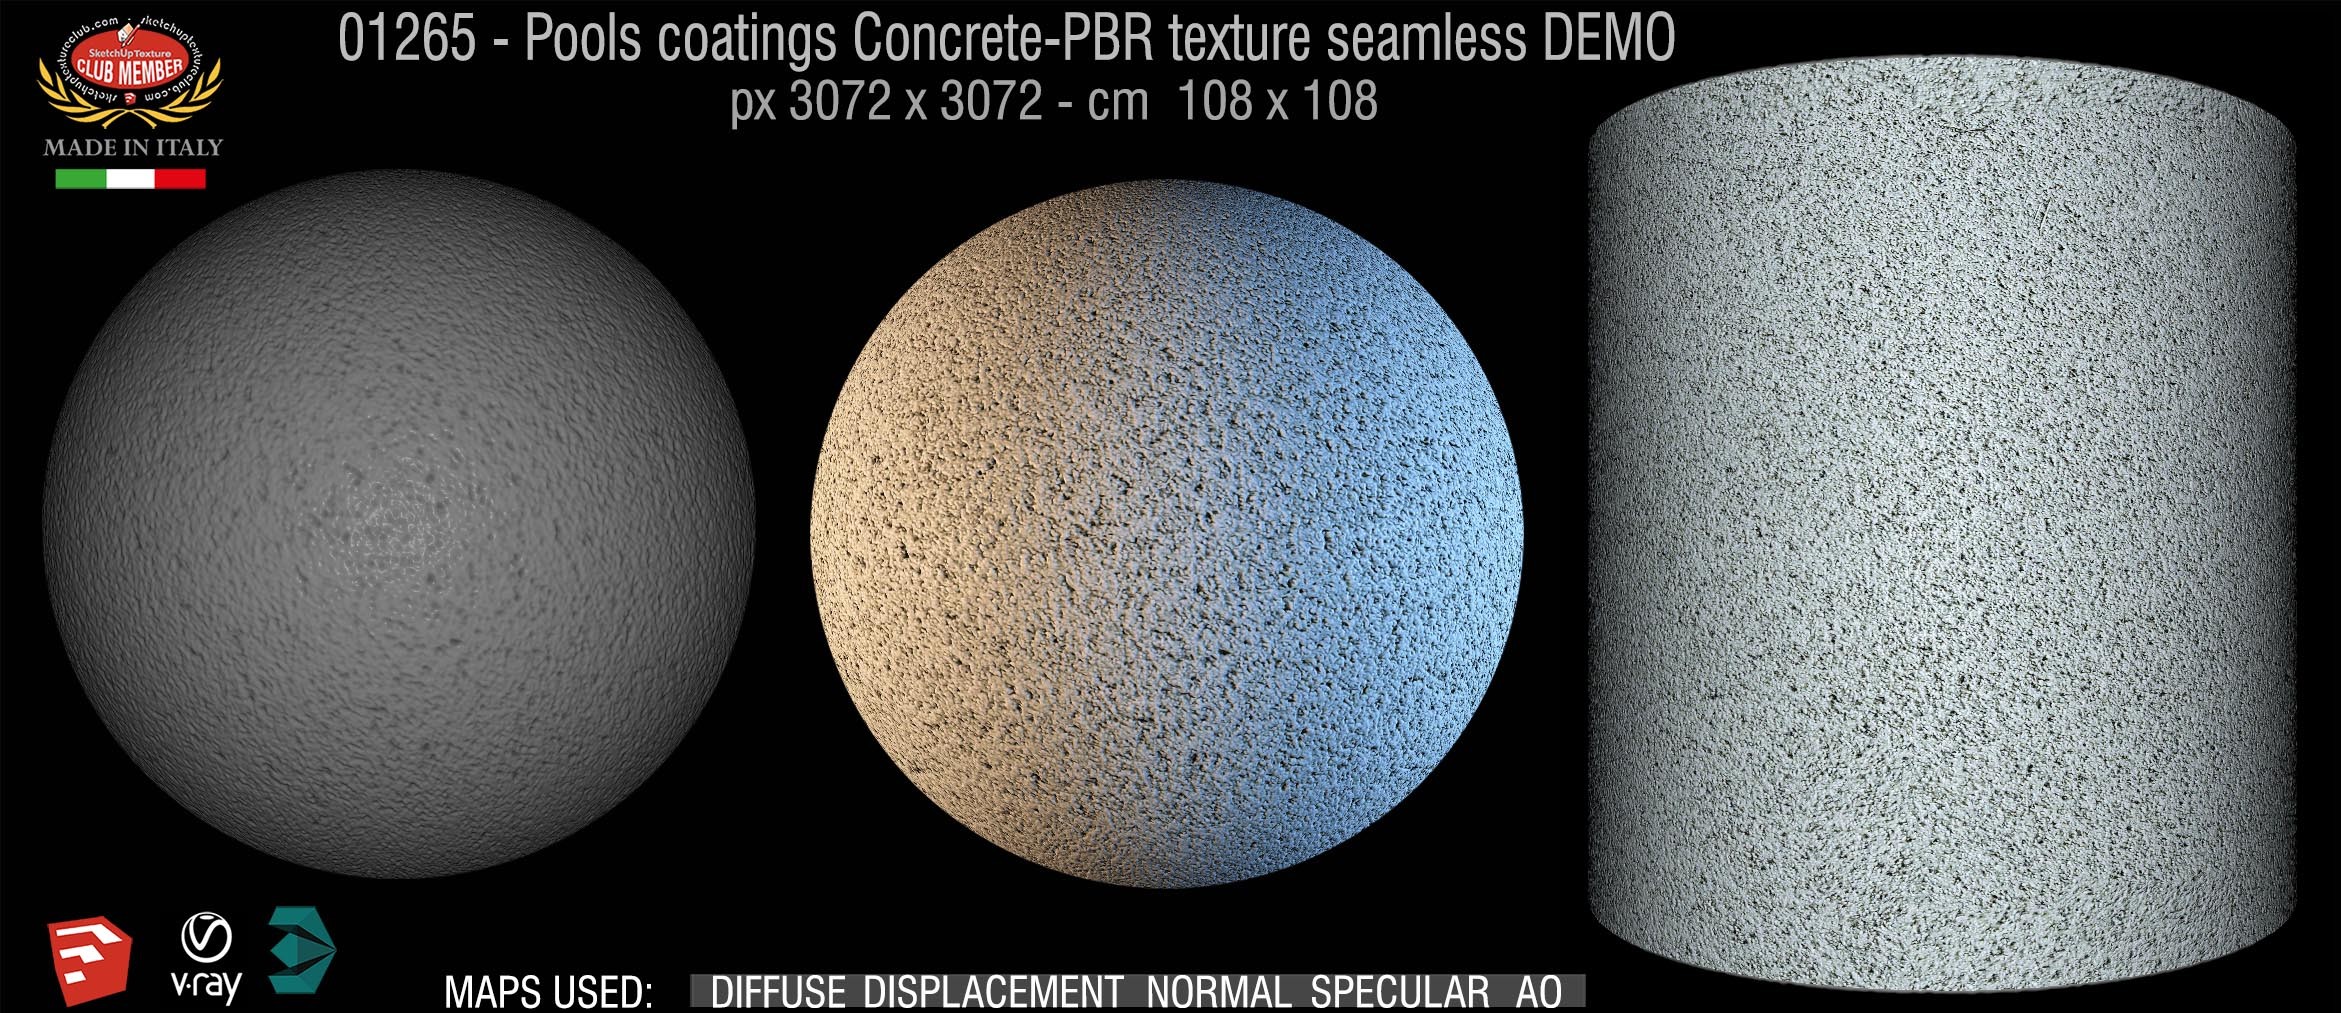 01265 Pools coatings Concrete-PBR texture seamless DEMO